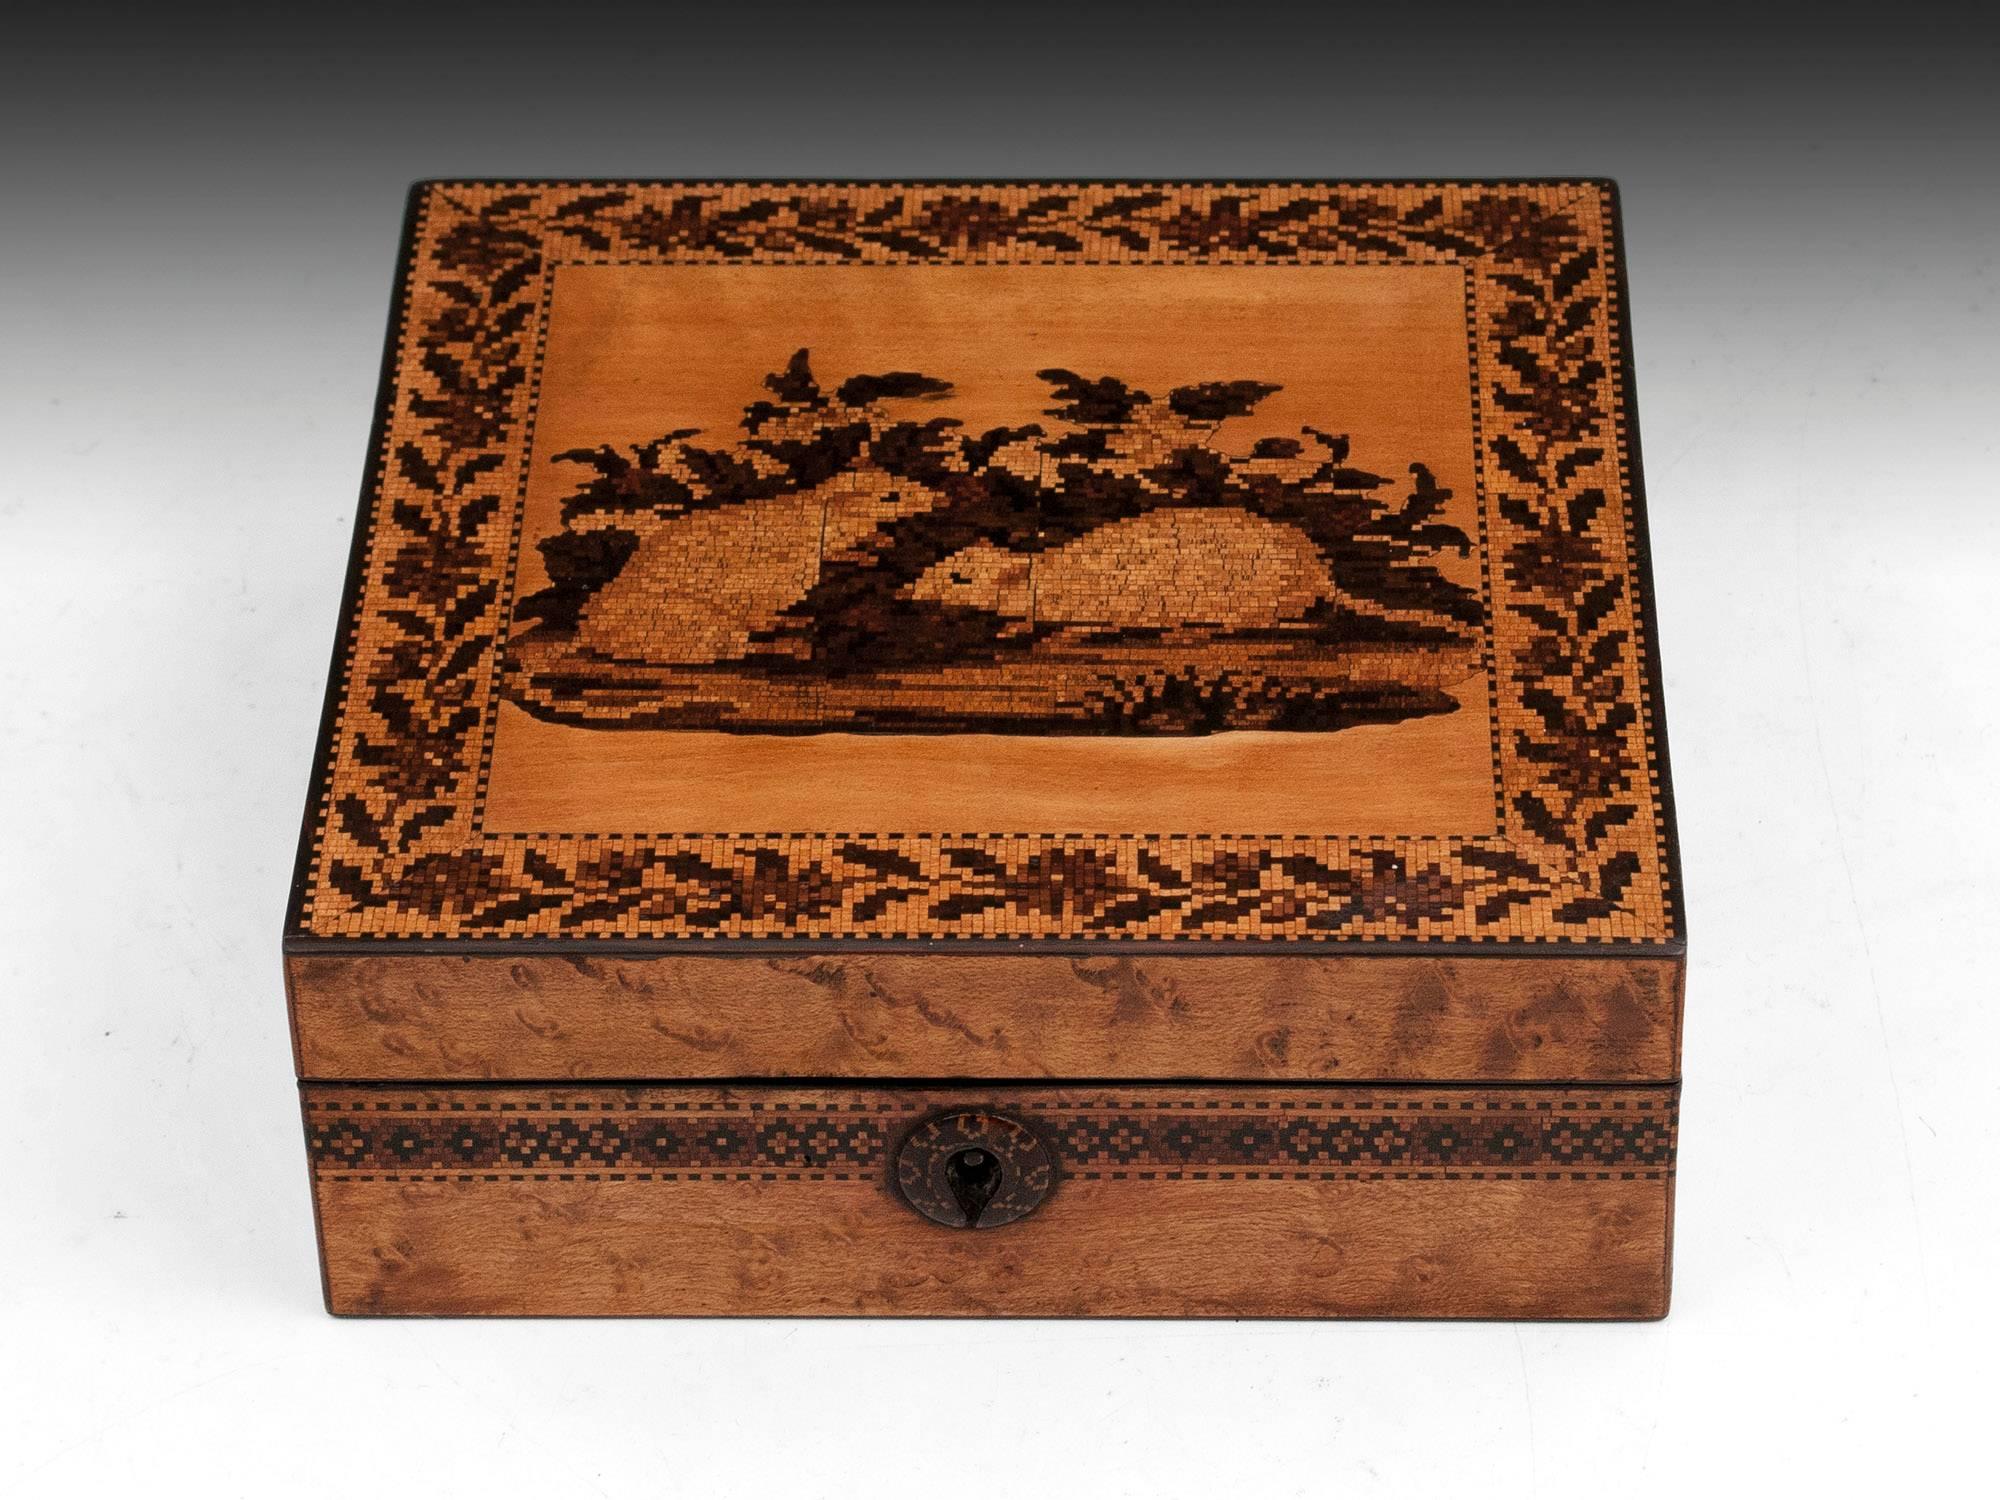 Tunbridge ware box with a scene of two mice on the top, surrounded with floral borders, veneered in water stained maple. 

The interior of this sweet Tunbridge box is lined with silk. 

This Tunbridge ware box comes with a fully working lock and